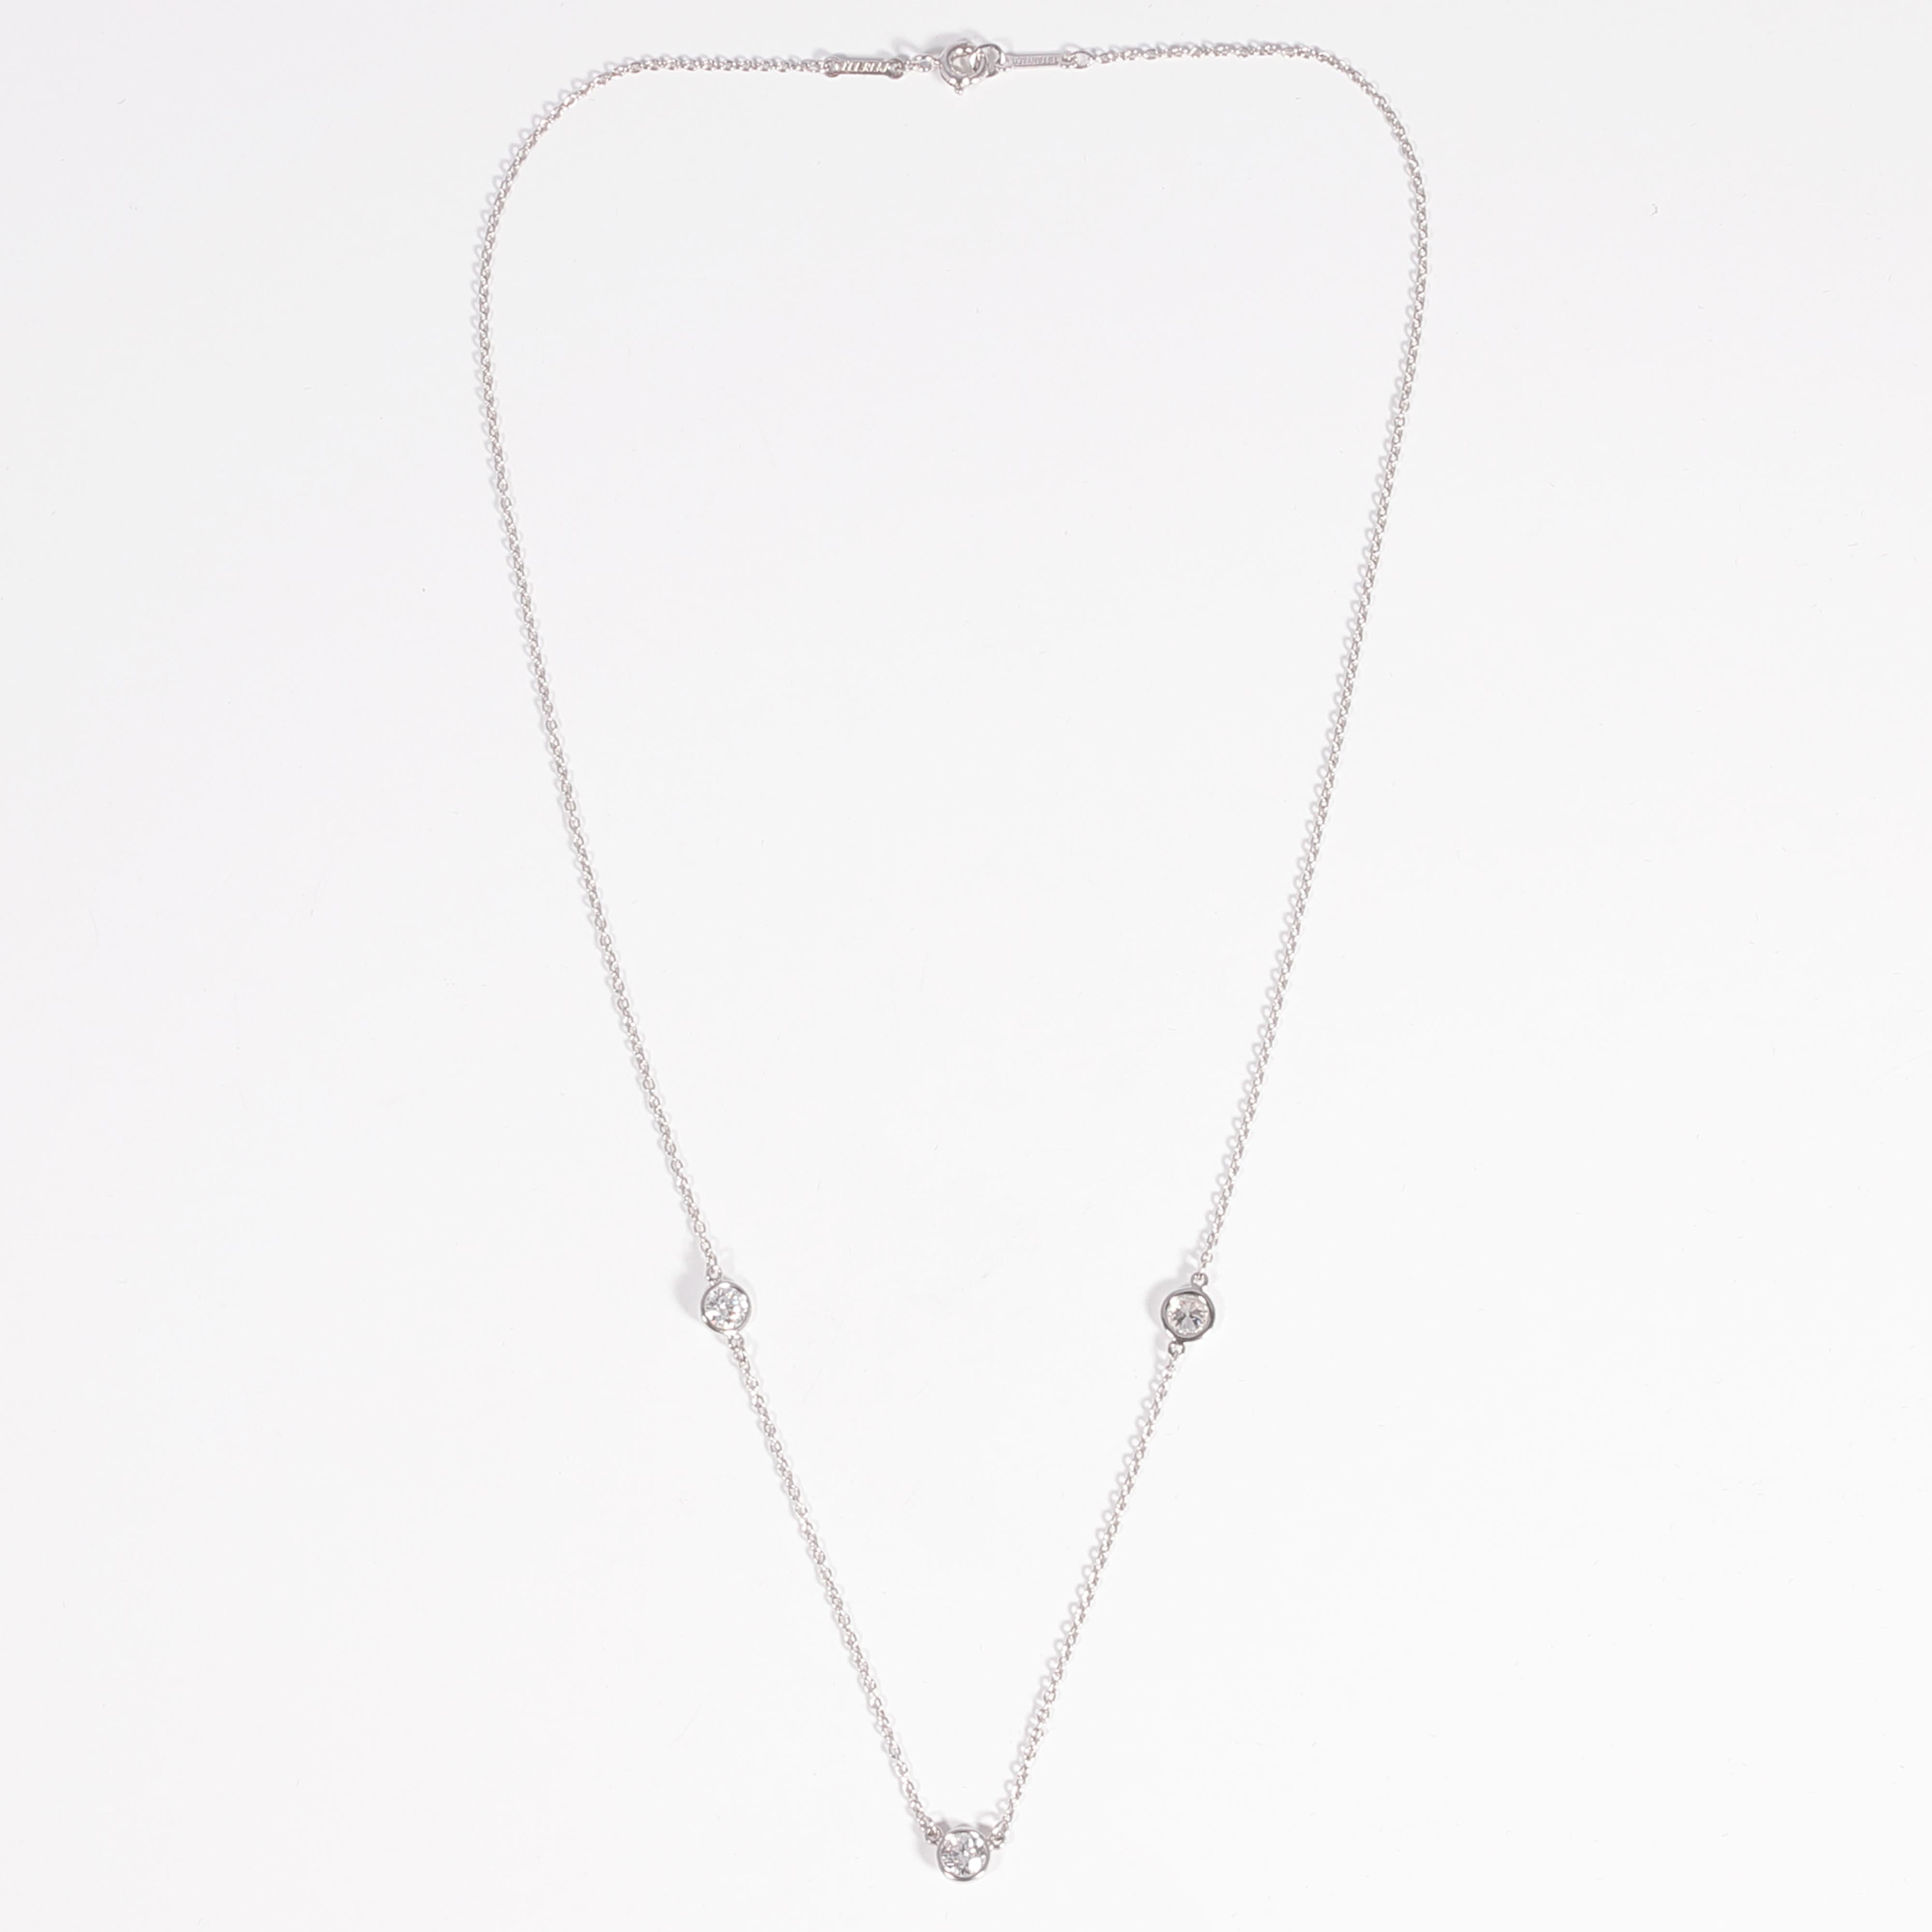 Round Cut Diamonds by the Yard Necklace by Elsa Peretti for Tiffany & Co.